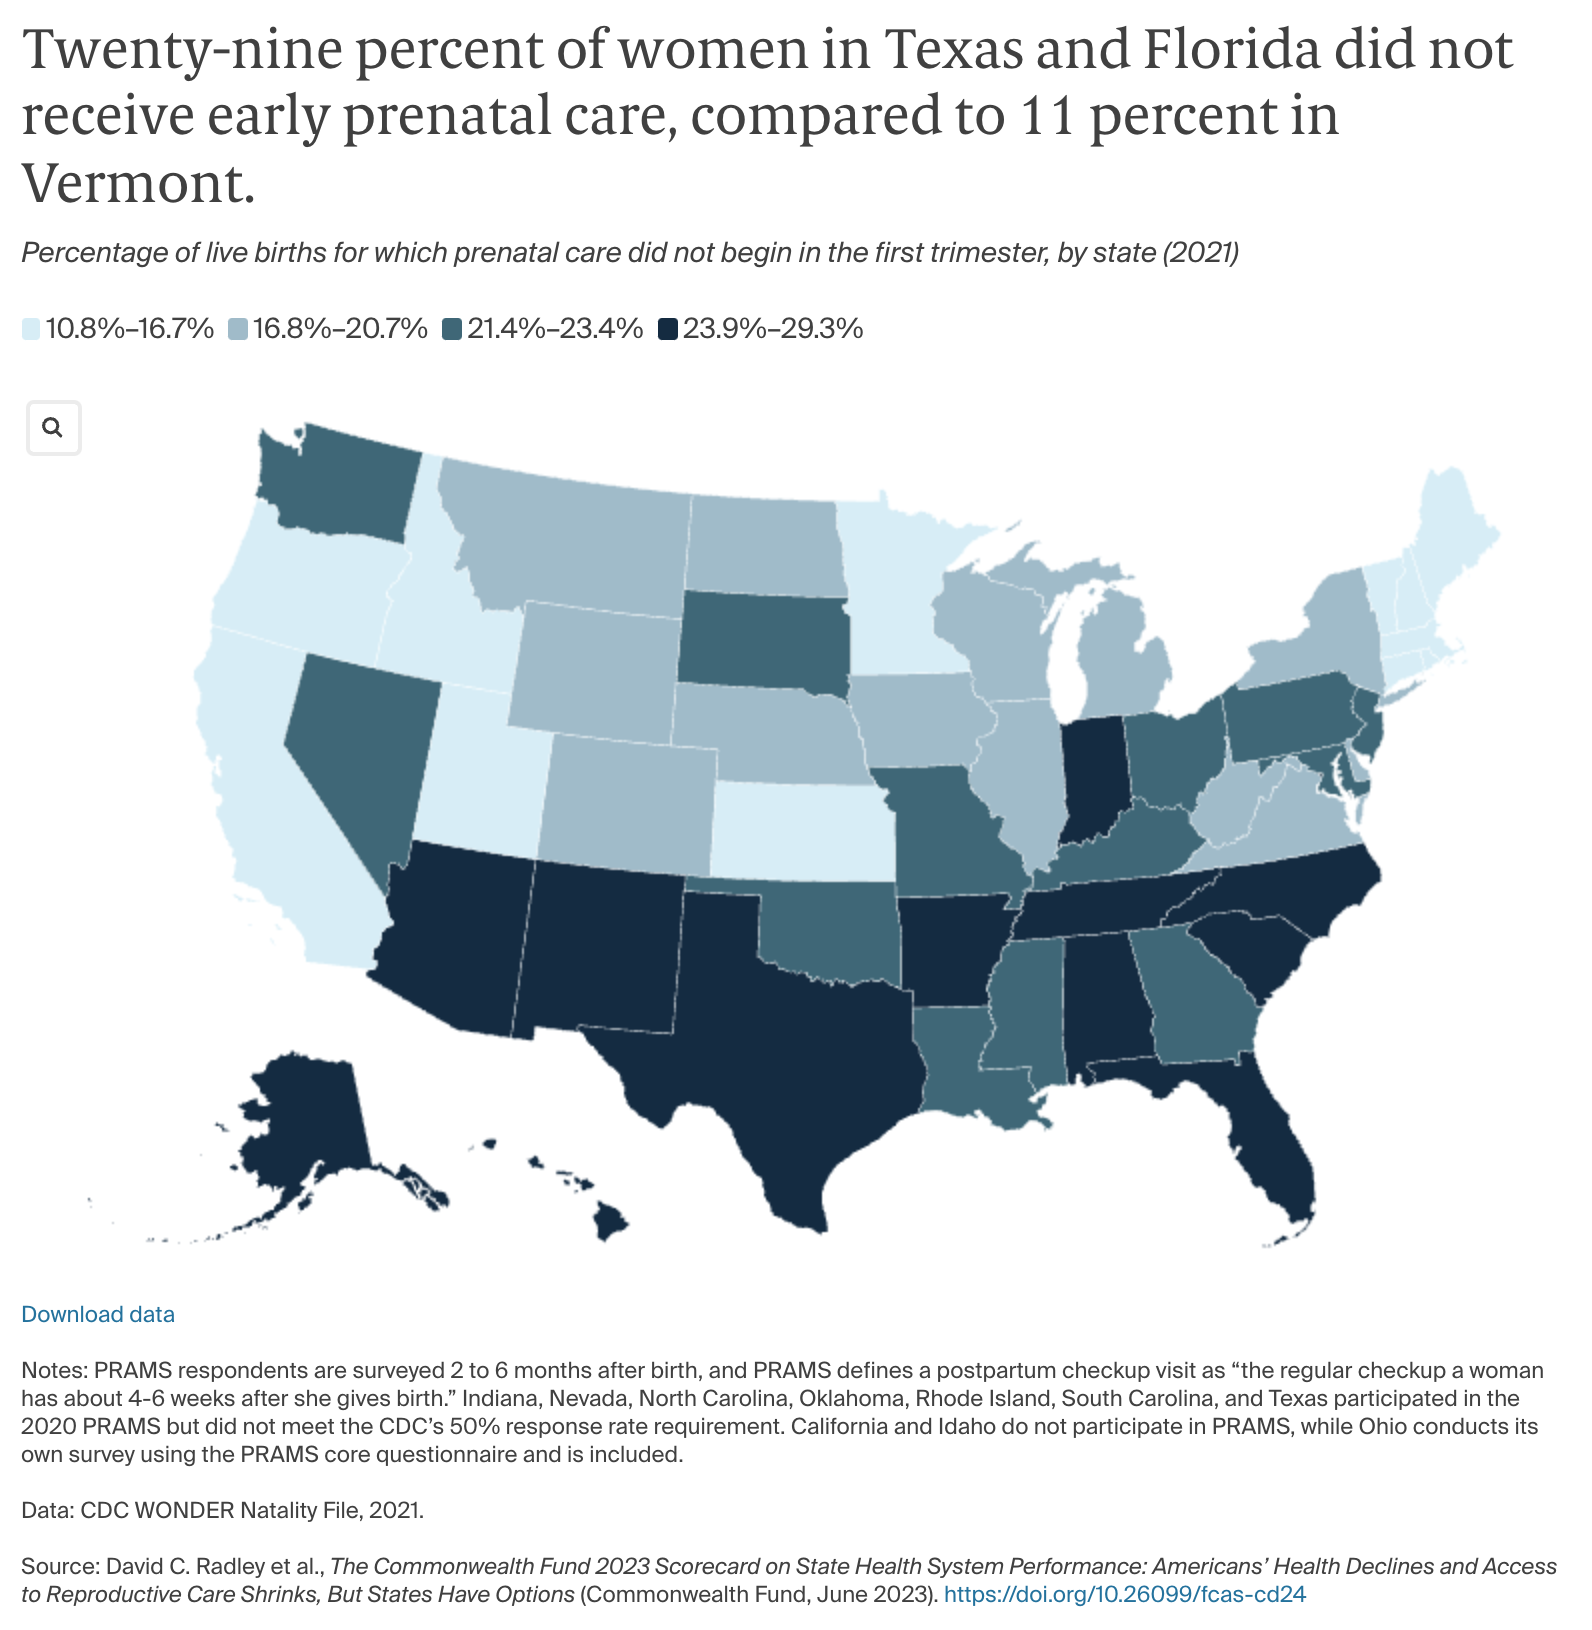 Twenty-nine percent of women in Texas and Florida did not receive early prenatal care, compared to 11 percent in Vermont.